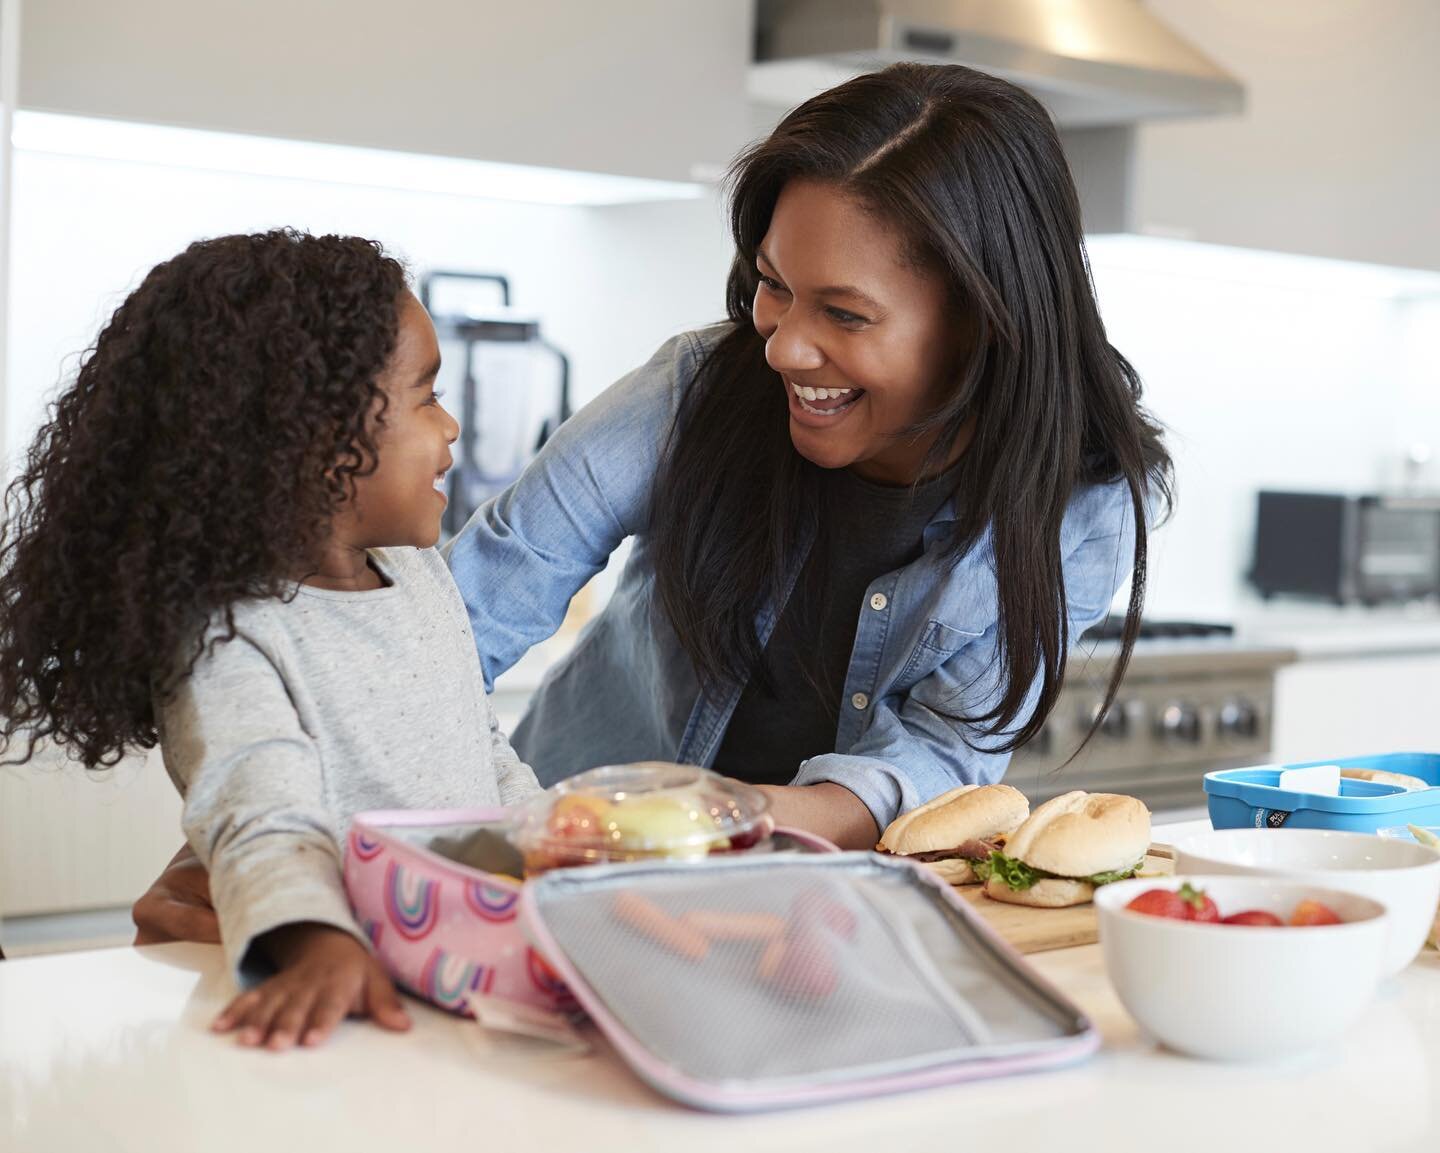 The back-to-school lunch routine may look a little different this year. Here are some quick tips as you pack your young-ones lunch this week! 🥪🧃

1. make a list of preferred fruit, vegetables, sandwich etc. to shop with your child.

2. the discussi